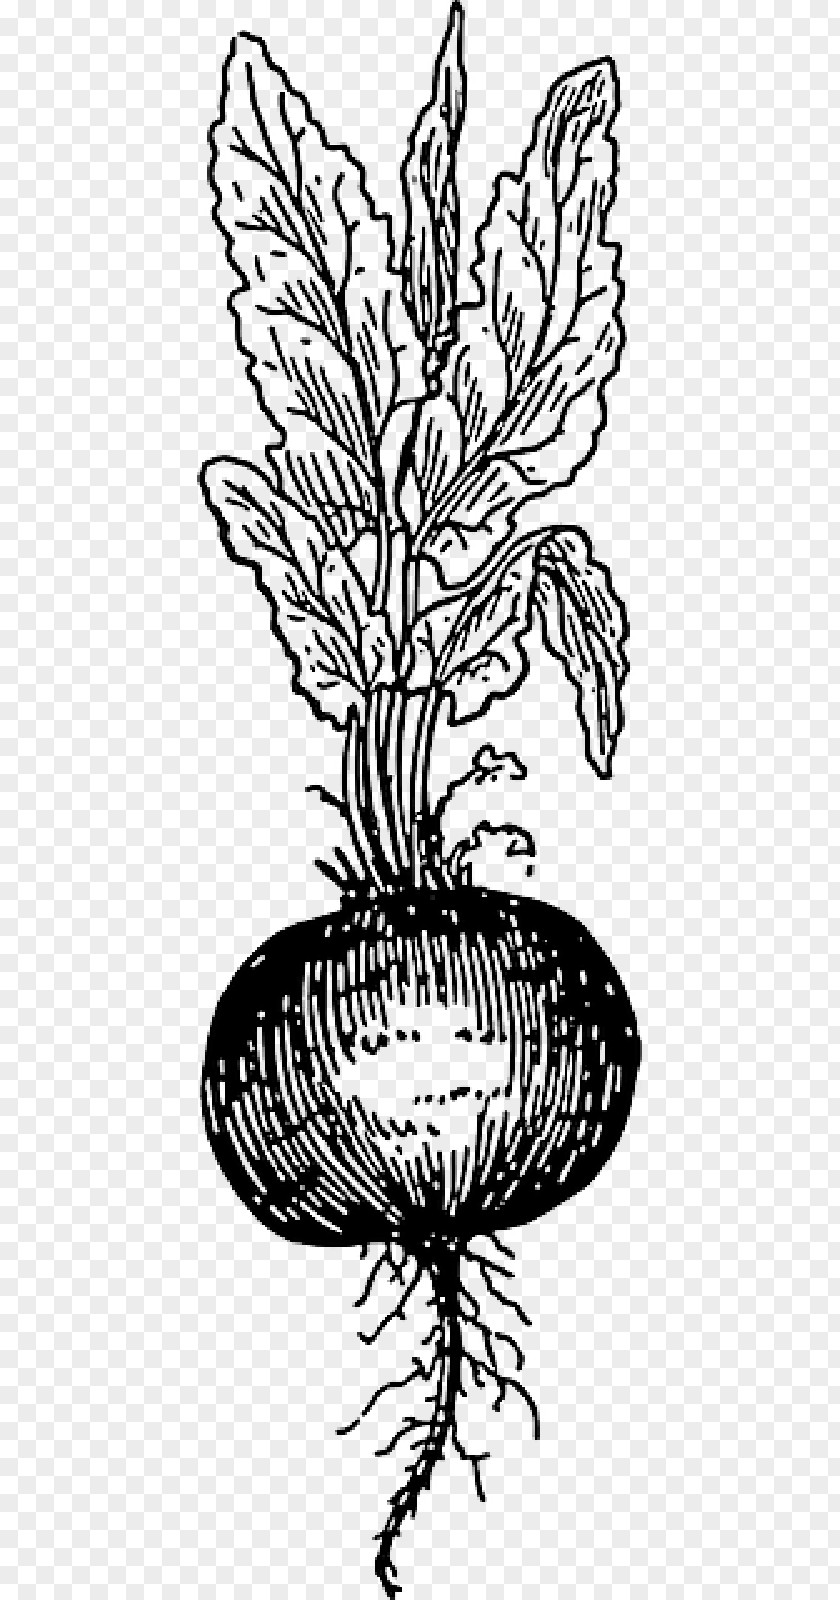 Beetroot Beetroots Drawing Clip Art Vegetable PNG